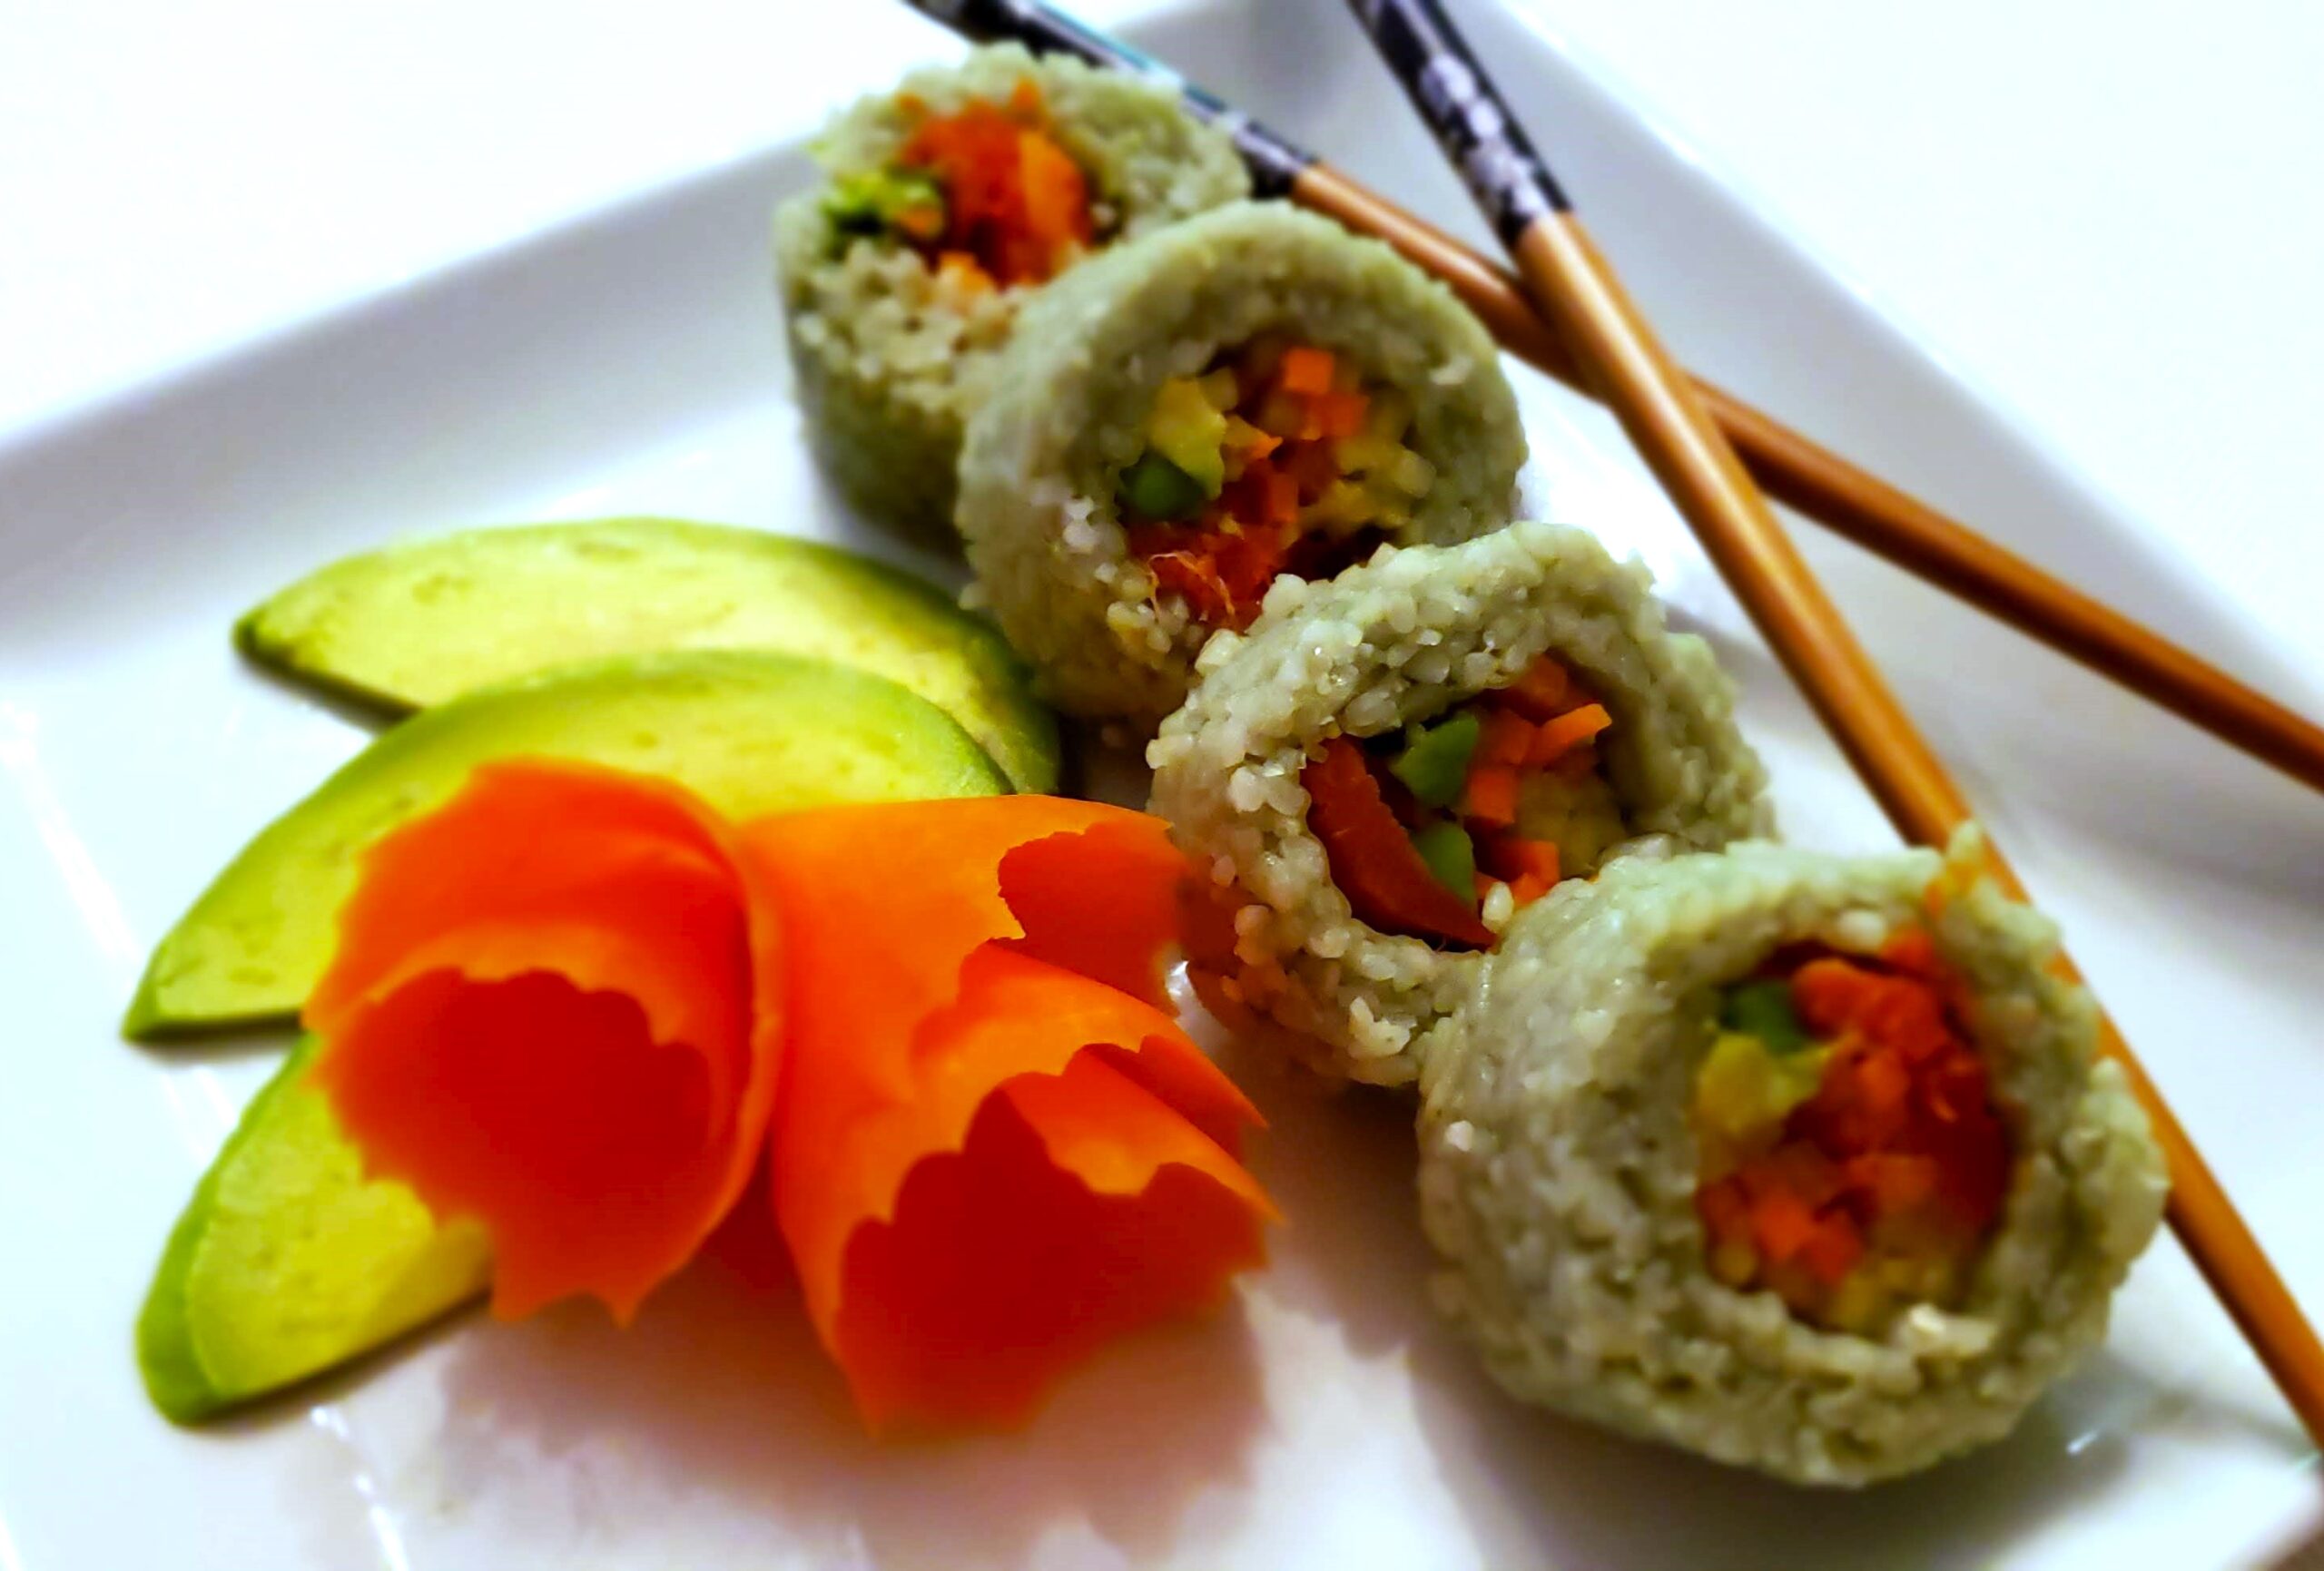 Bamboo Sushi with Smoked Salmon From "Shabbos Under Pressure"